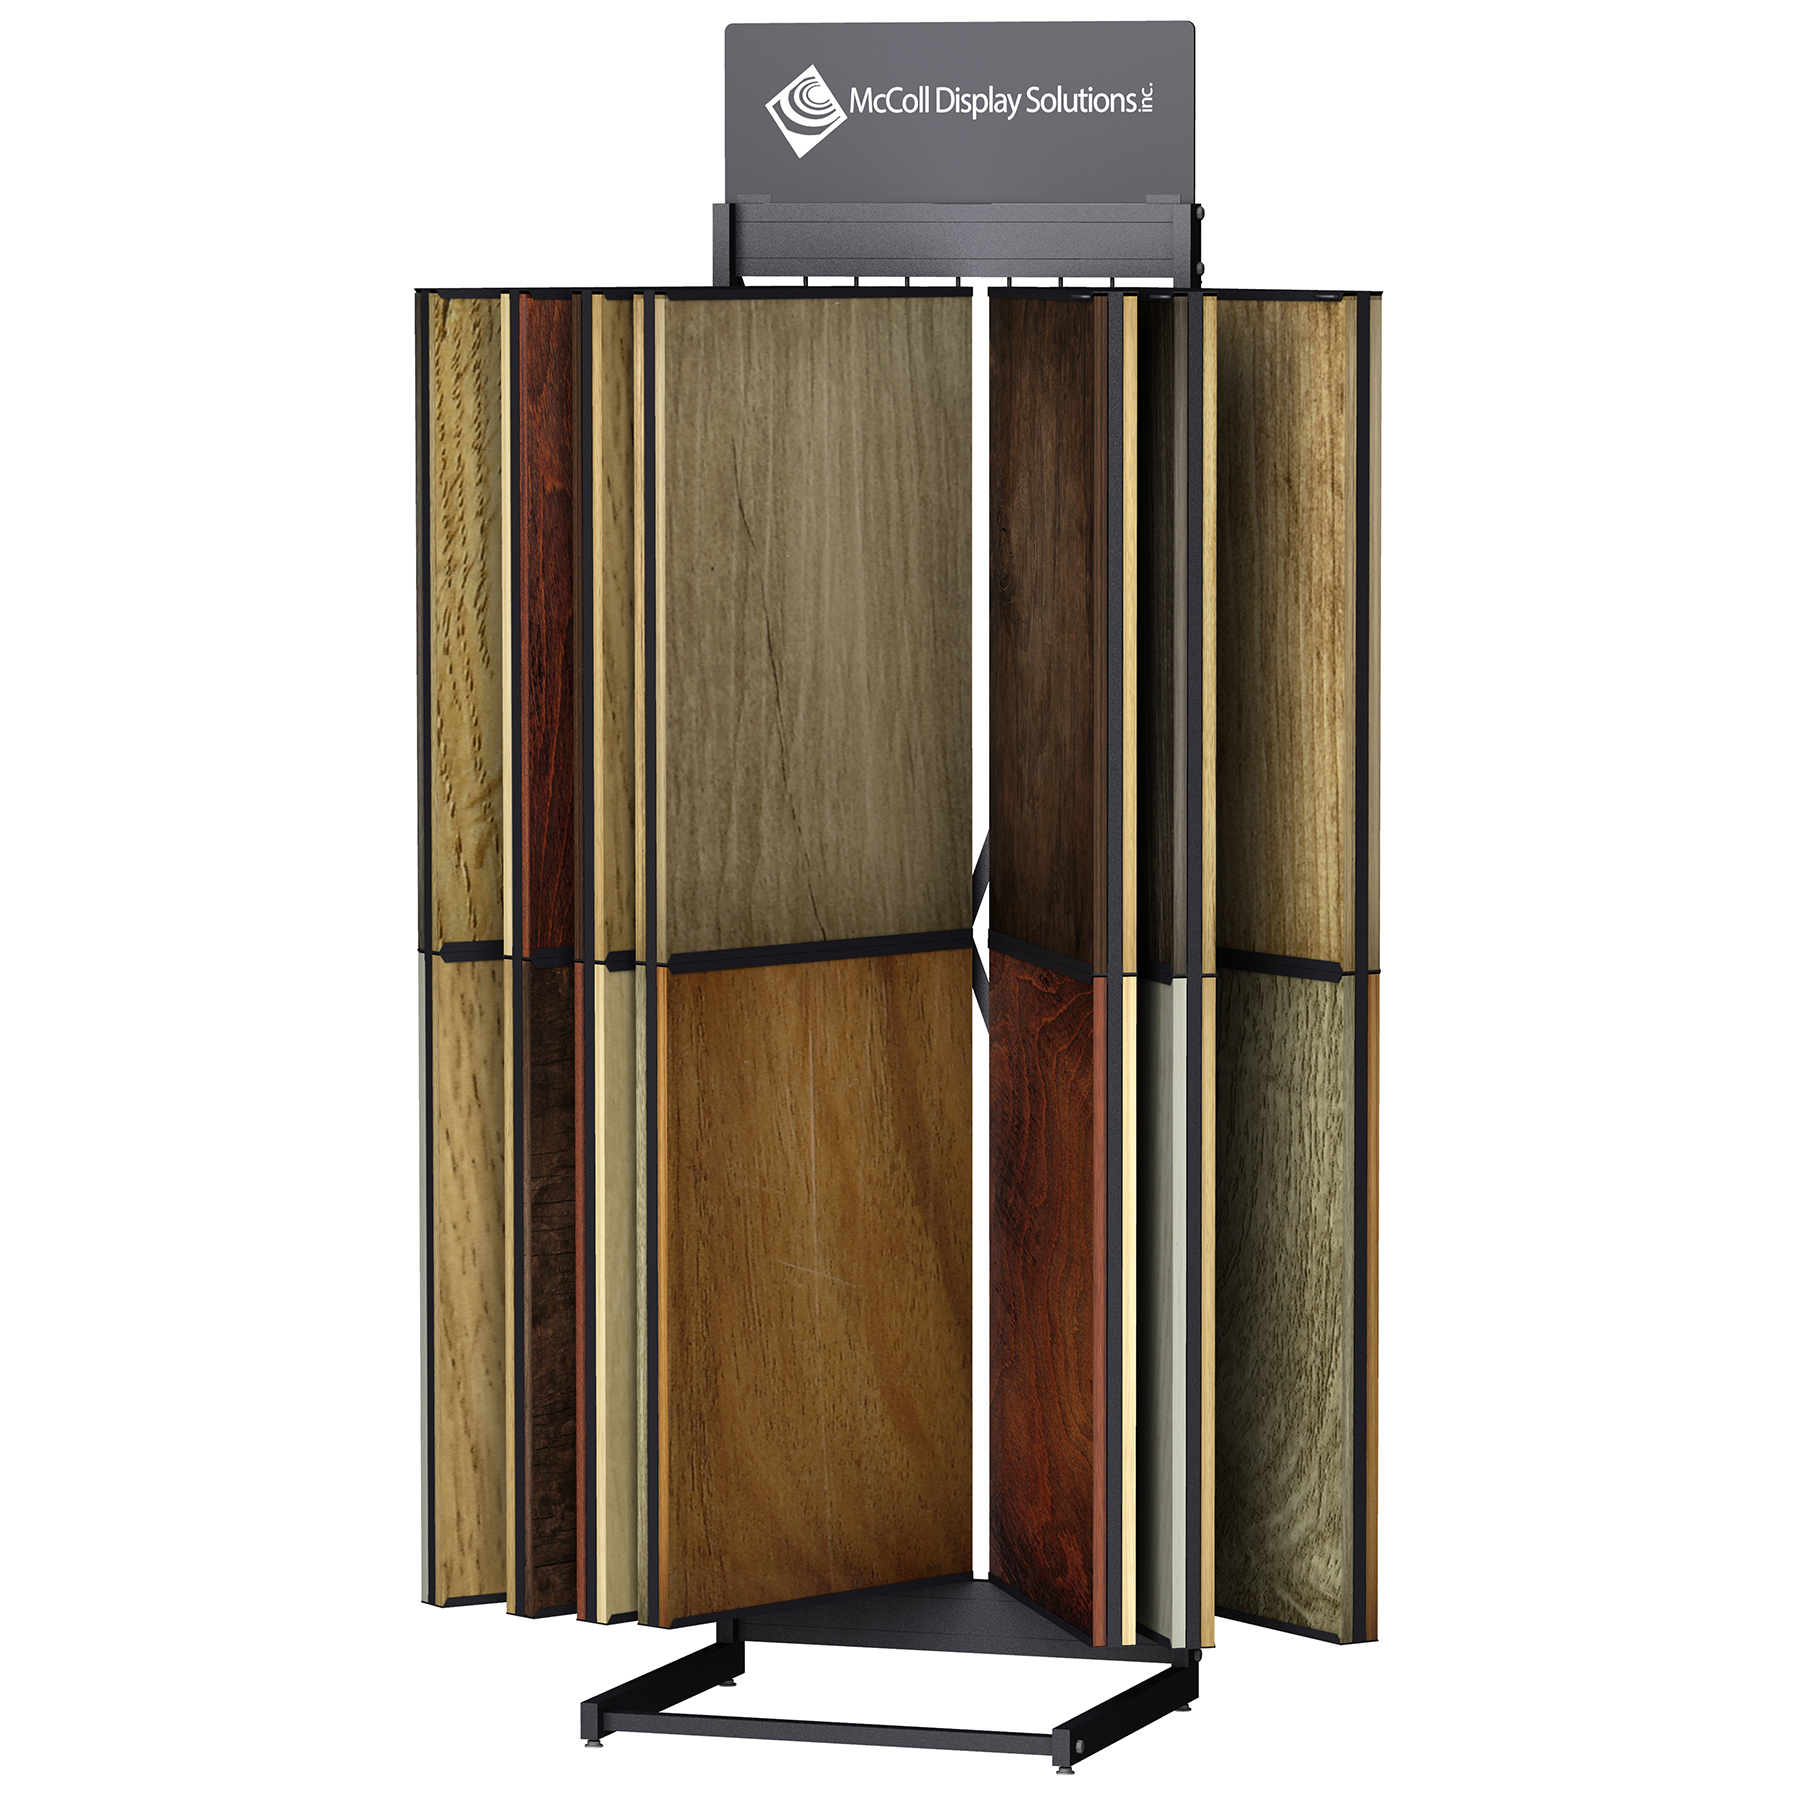 CD42 Wing Rack Channel System Tower for Hardwood Laminate Bamboo Reclaimed Wood Plank Samples Display